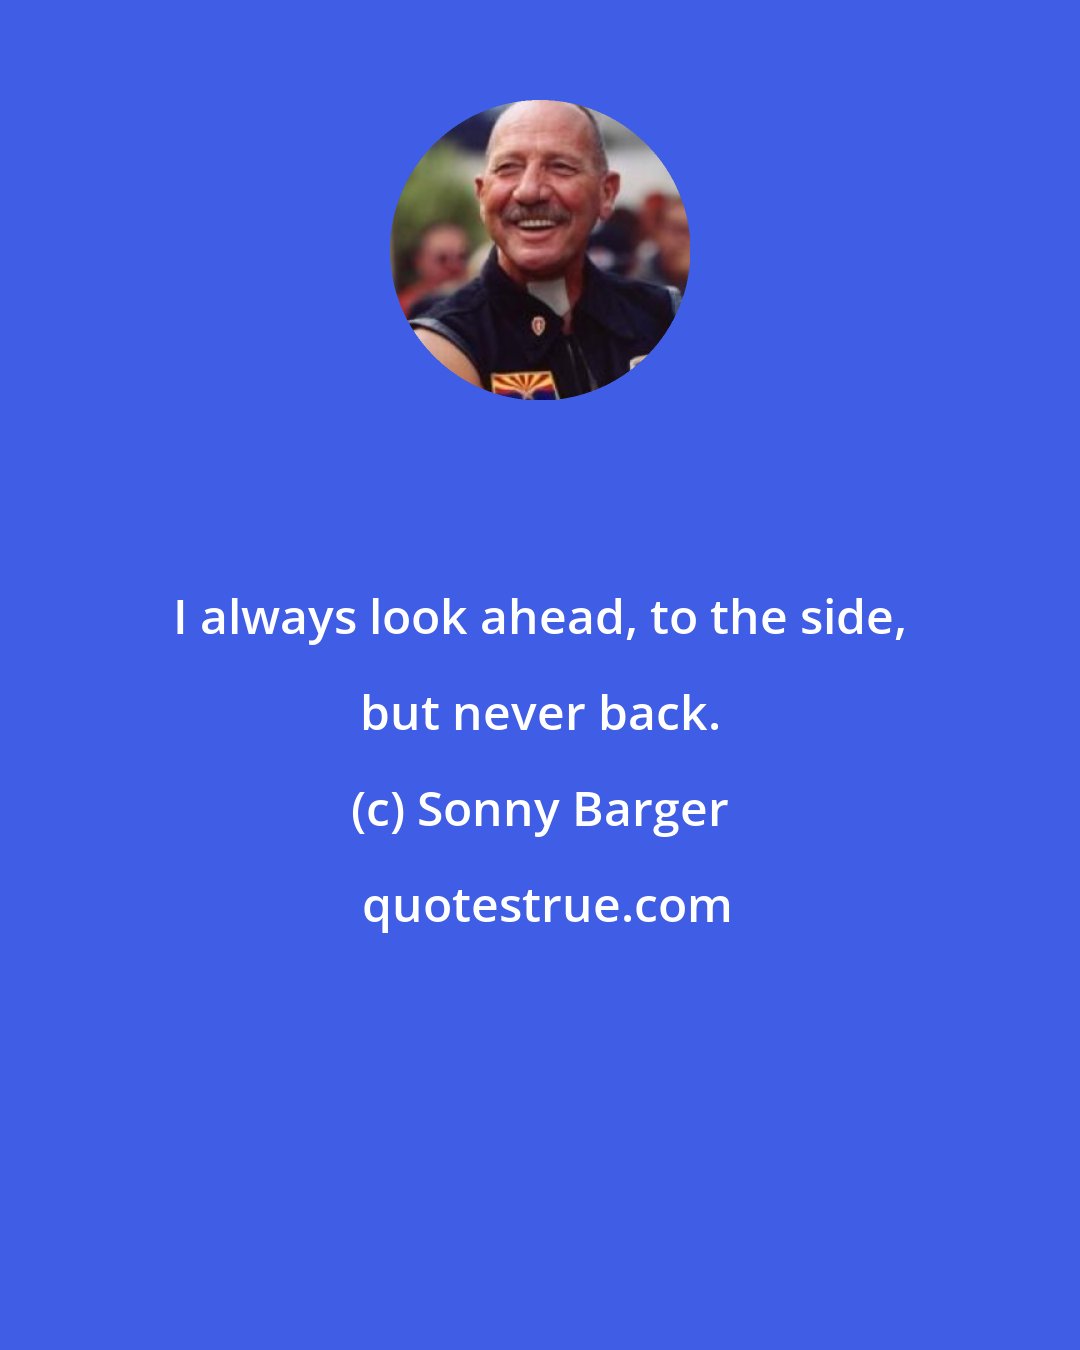 Sonny Barger: I always look ahead, to the side, but never back.